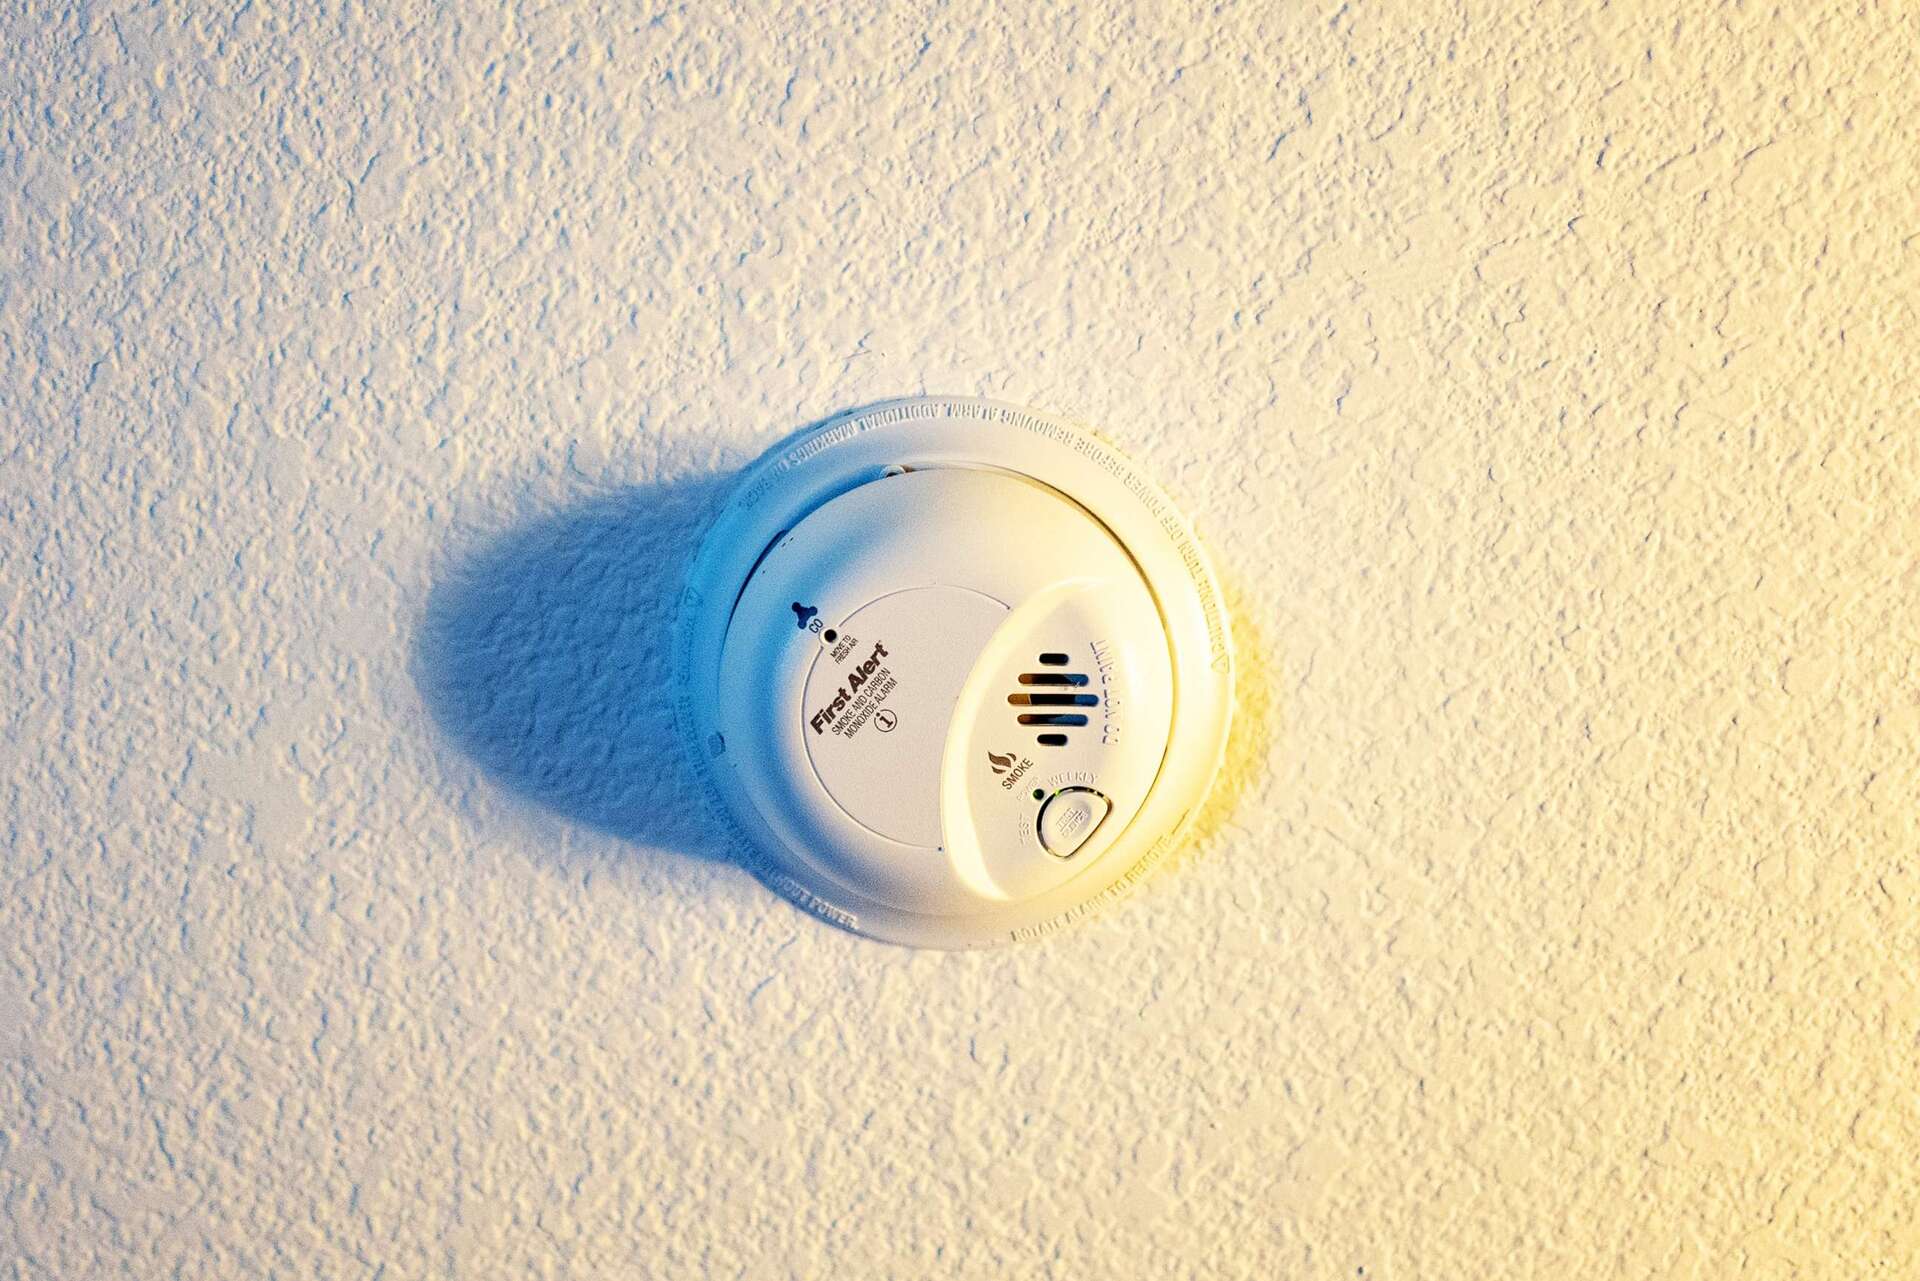 How To Know When A Carbon Monoxide Detector Is Going Off